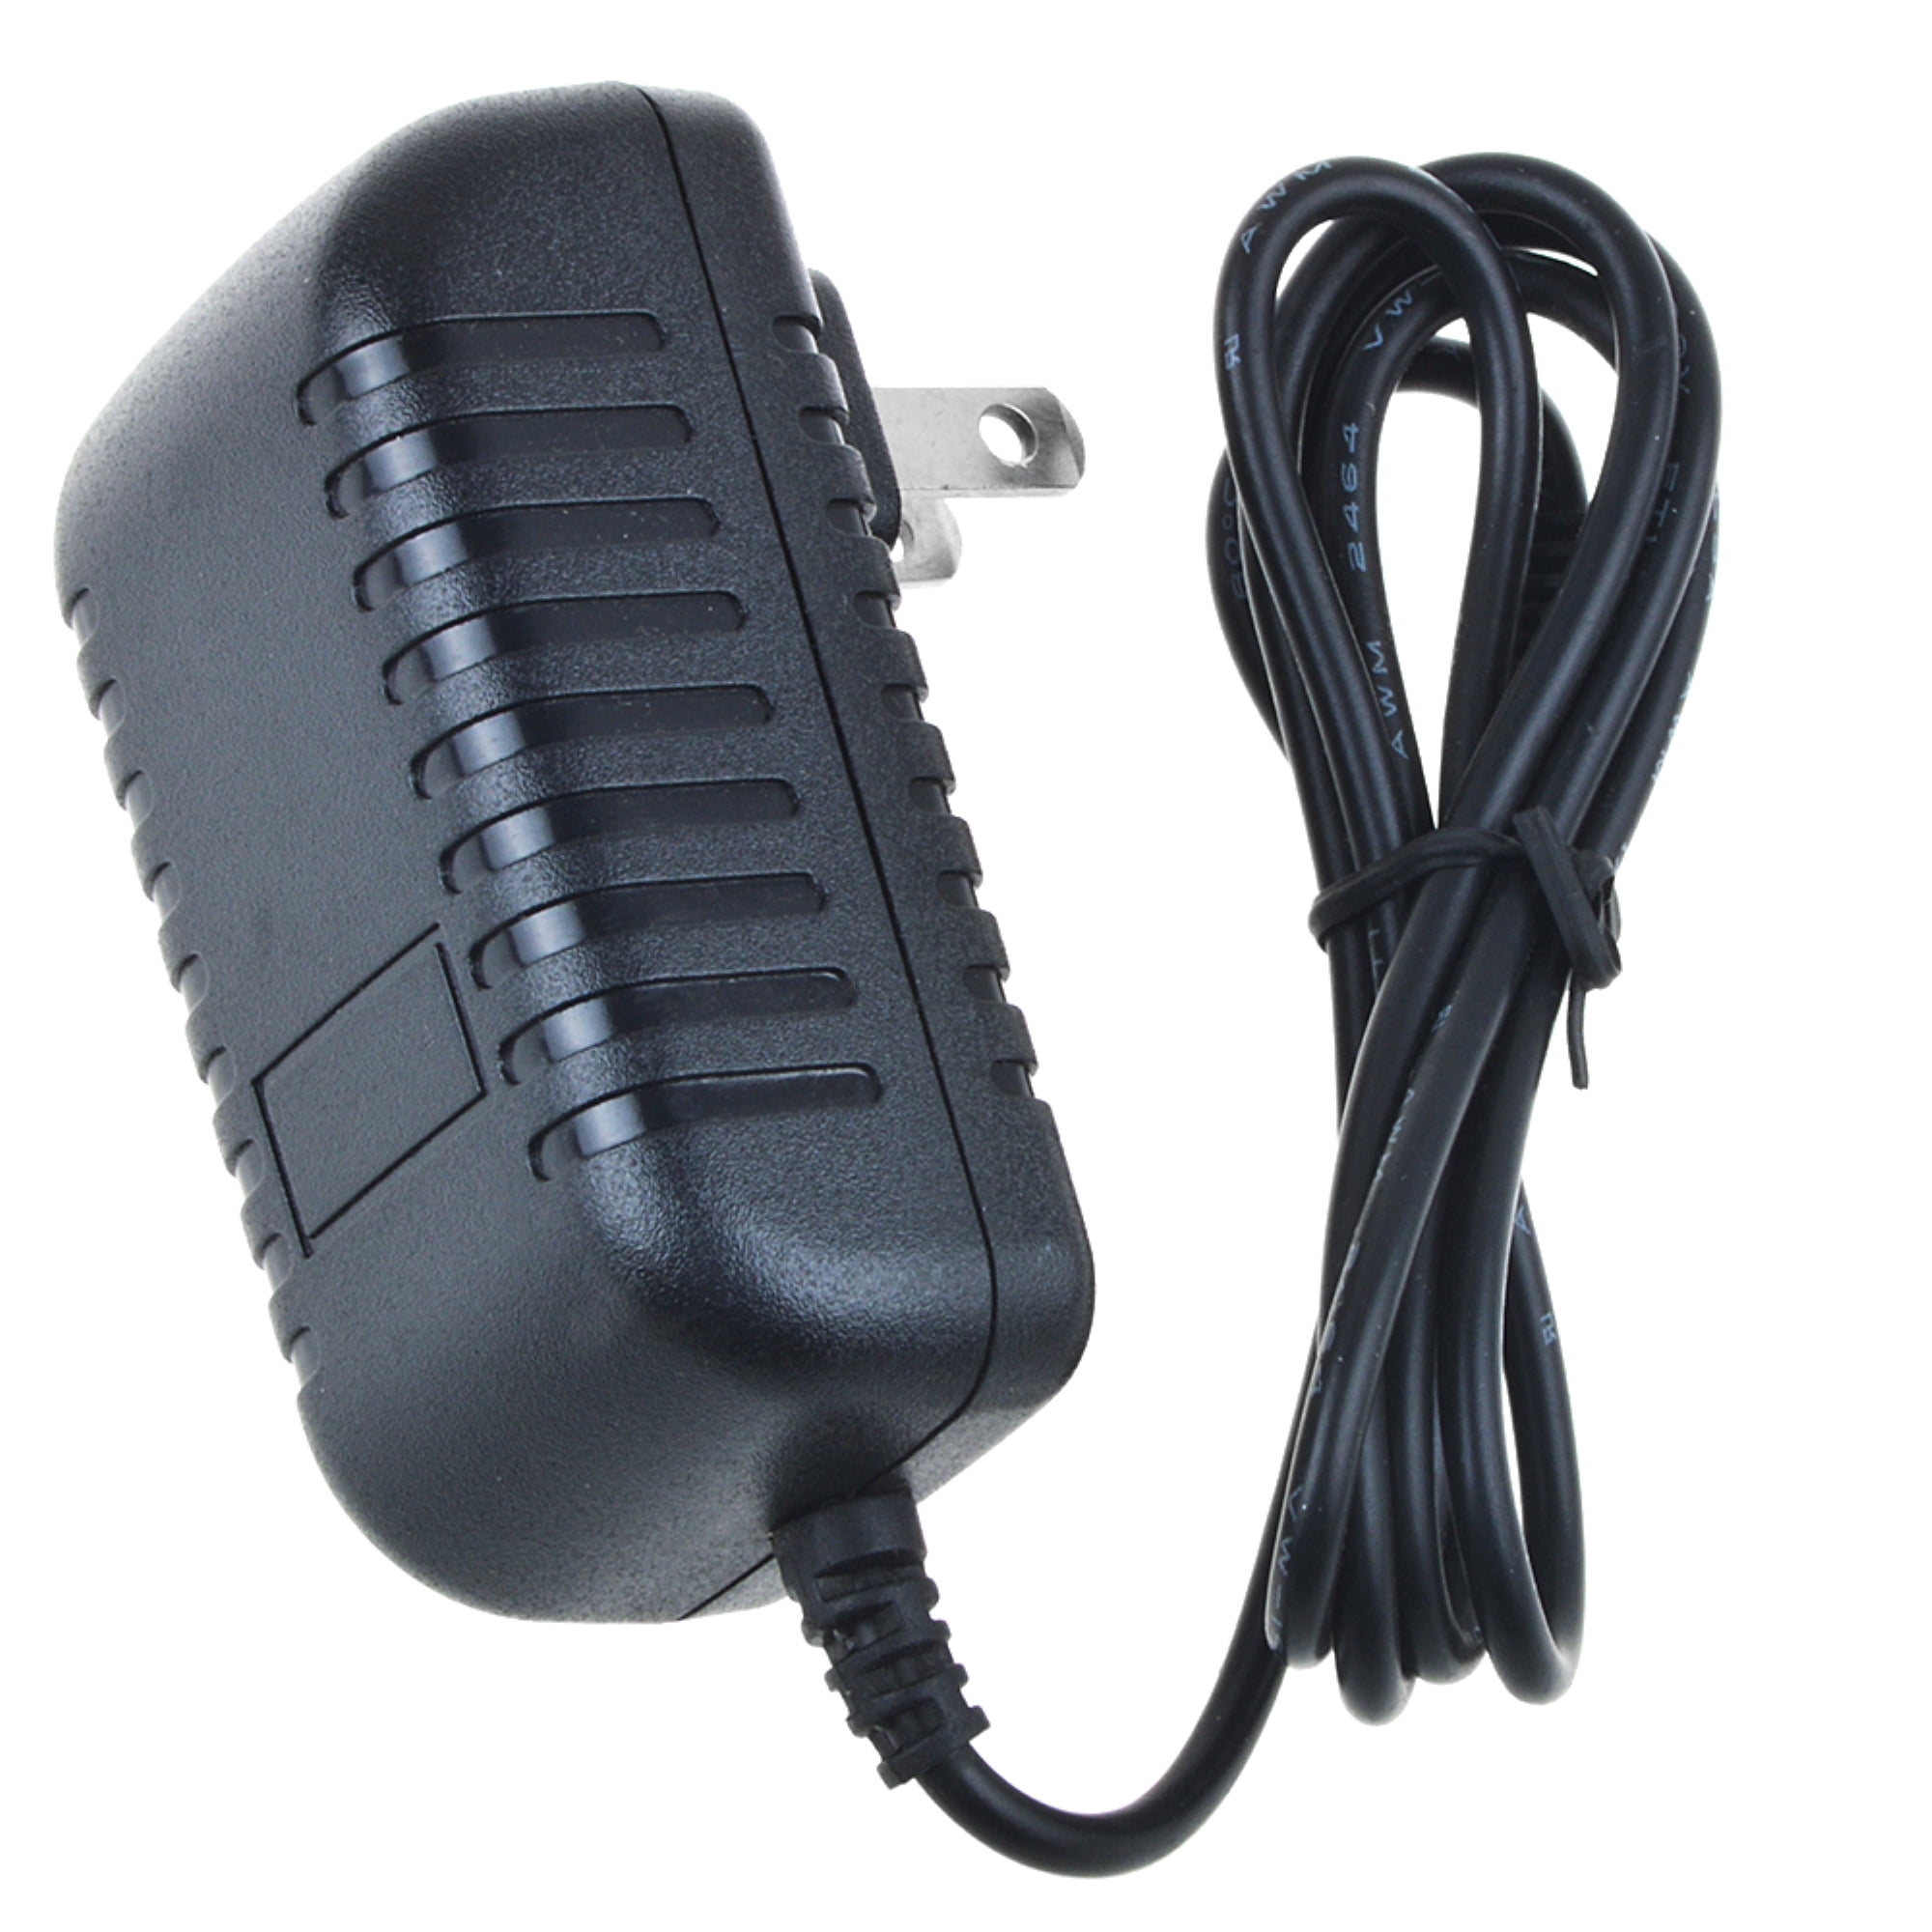 AC Adapter for Snap On Scanner Solus Ethos Solus Pro Solus Ultra & Vantage Pro 